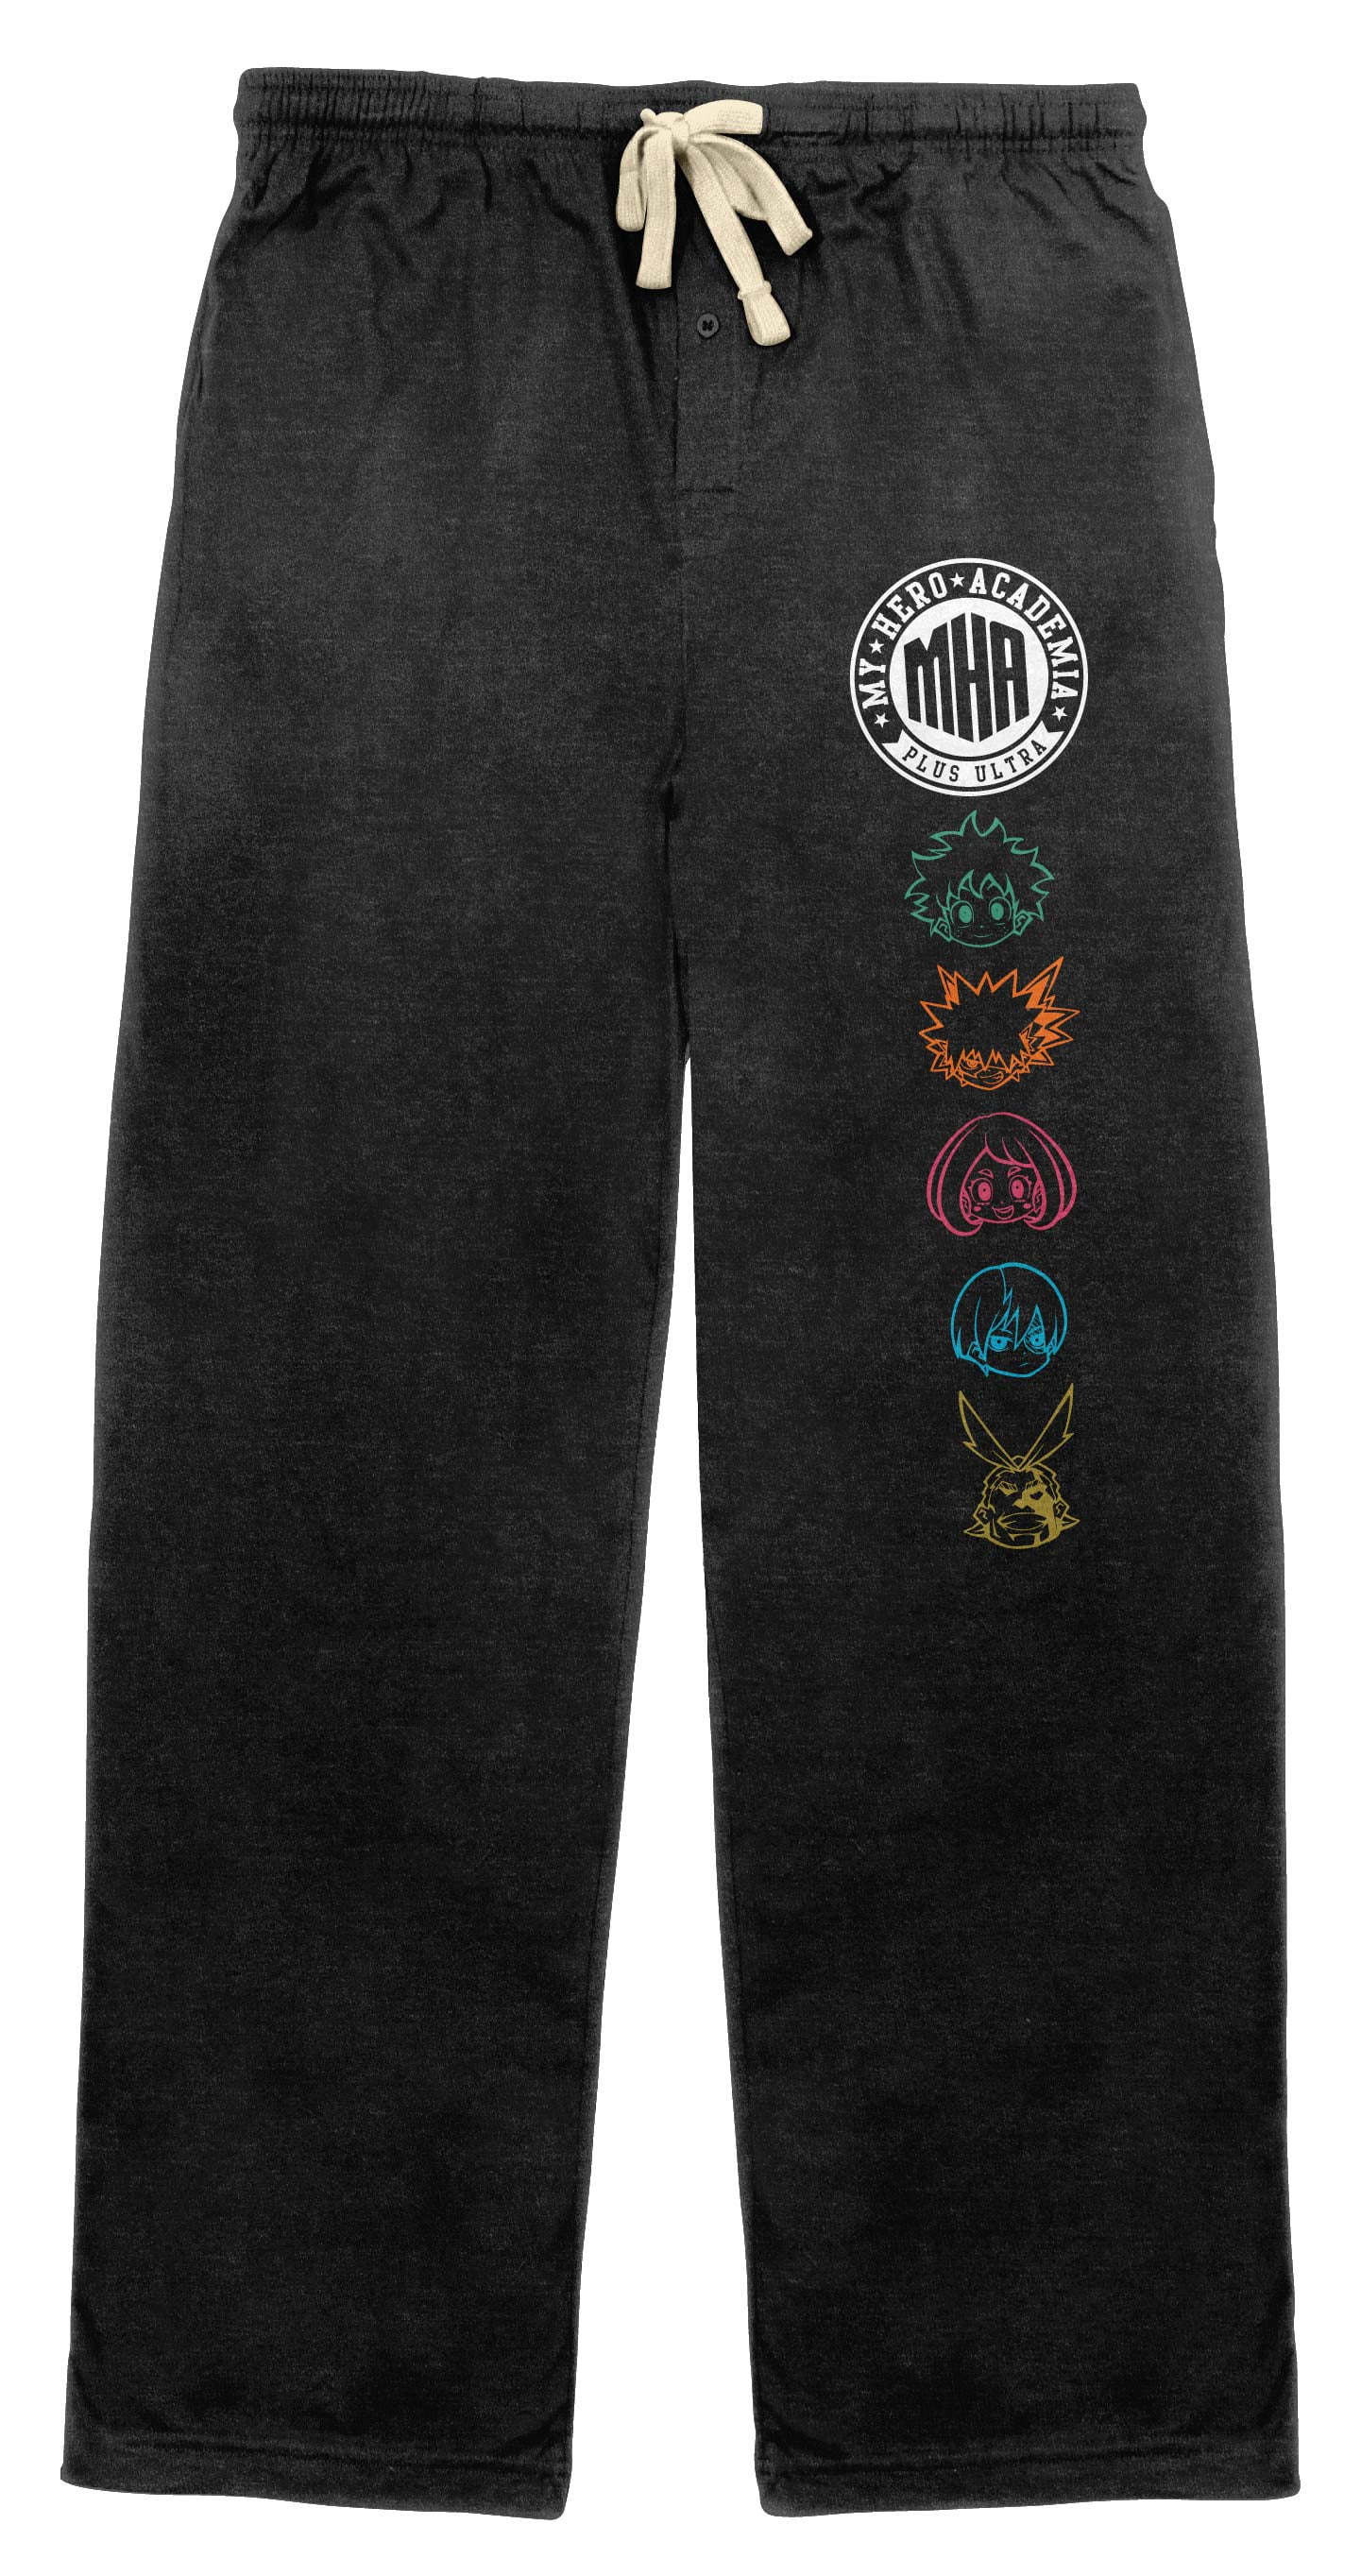 Anime One Punch Man Hero Mens Sweatpants Bottom Long Pant with Pocket